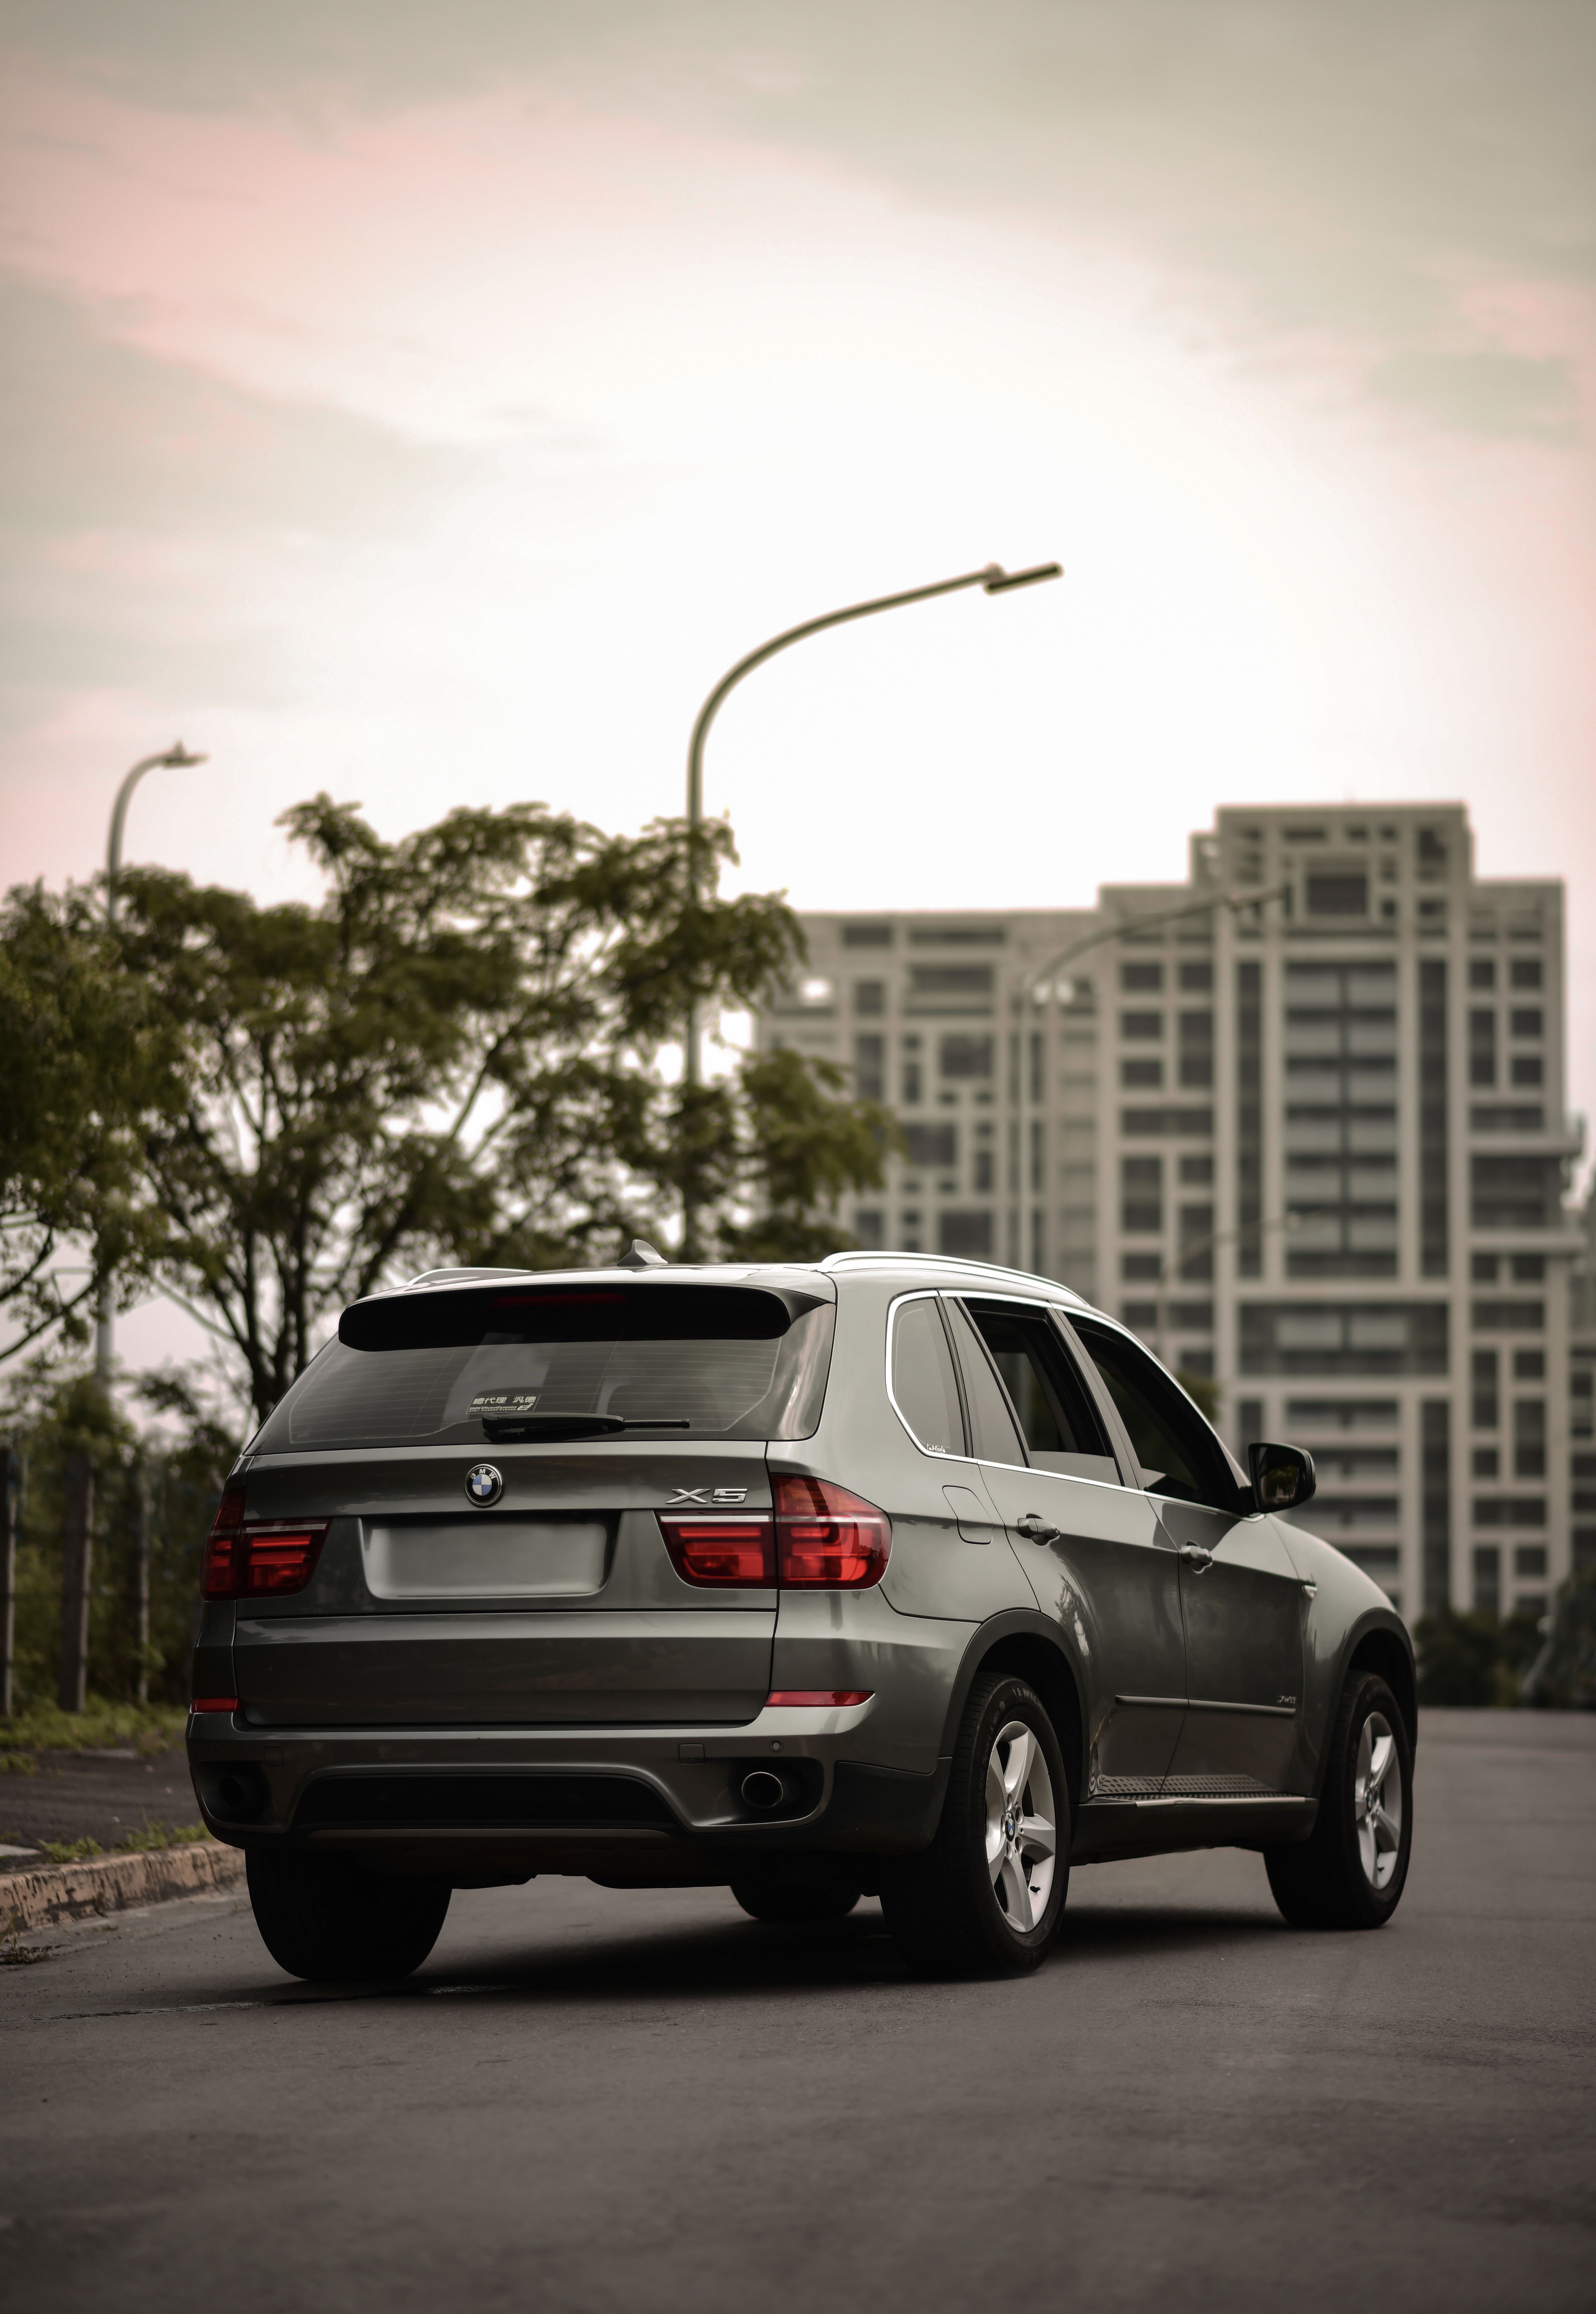 Cool Wallpapers side view, bmw, cars, suv, bmw x5